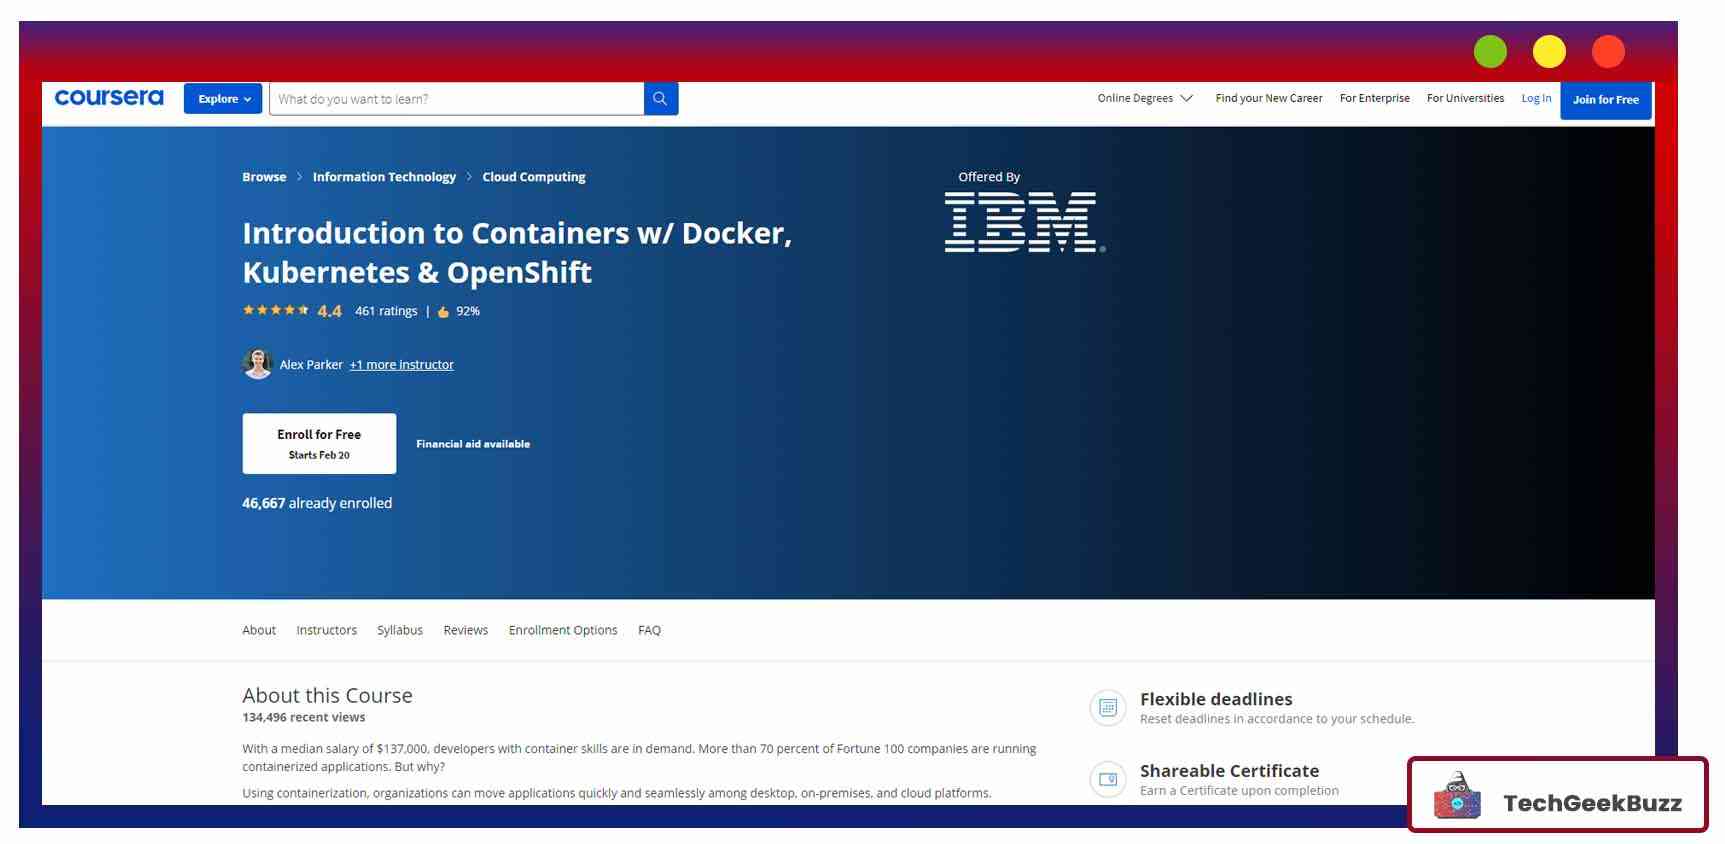 Introduction to Containers w/ Docker, Kubernetes & OpenShift